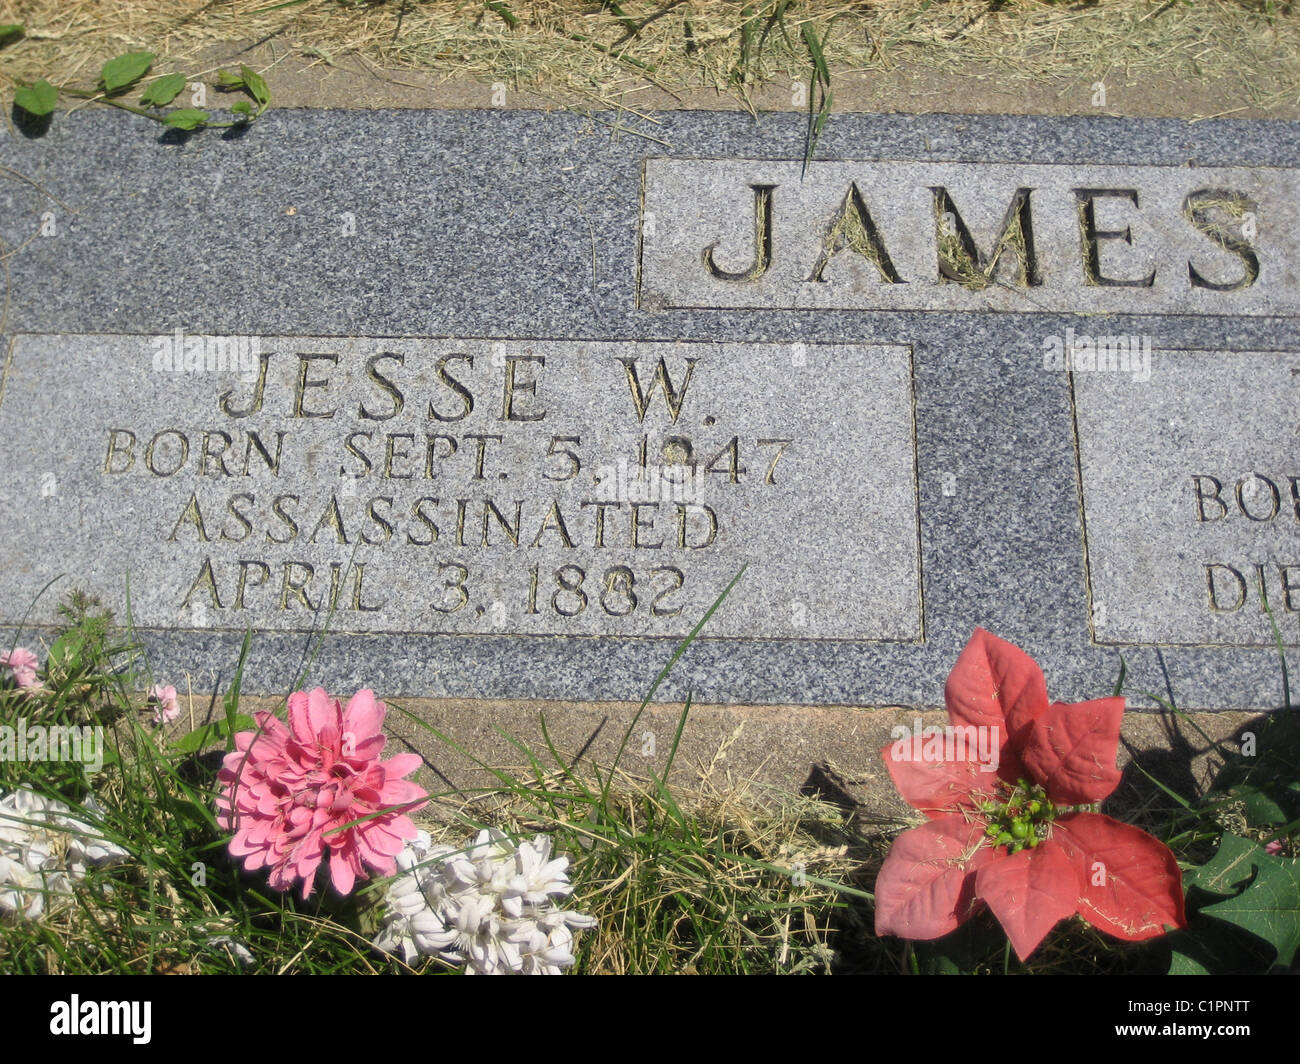 Close-up view of the enscription on the Jesse James gravestone in the Mount Olivet Cemetery, Kearney, Missouri, USA. Stock Photo